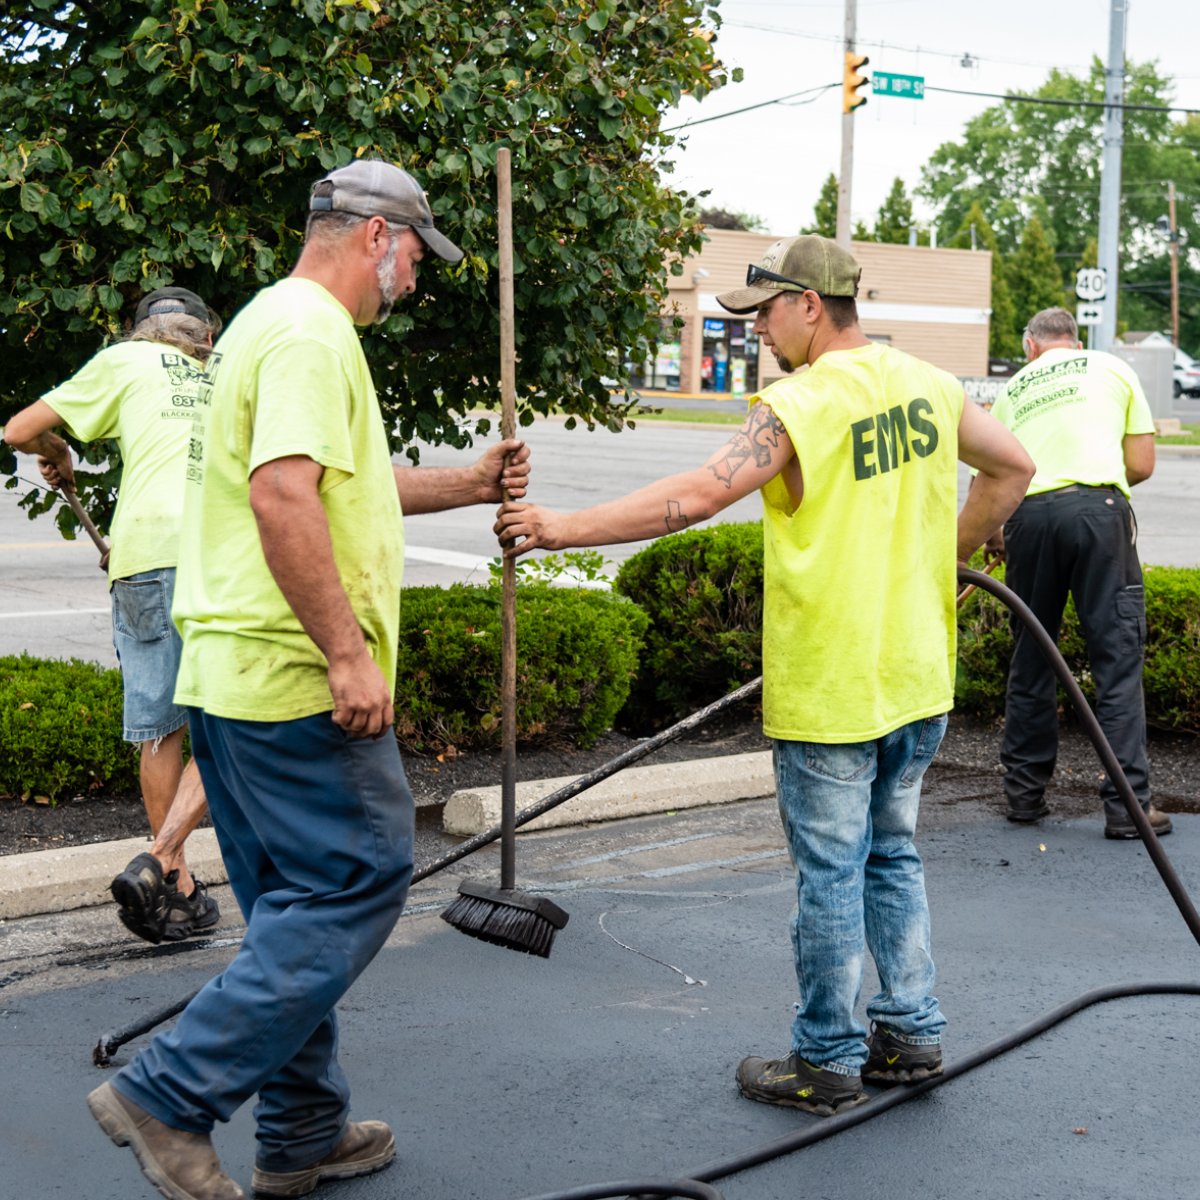 Need a team to pave the way? Black Kat Paving & Sealcoating can get it done!